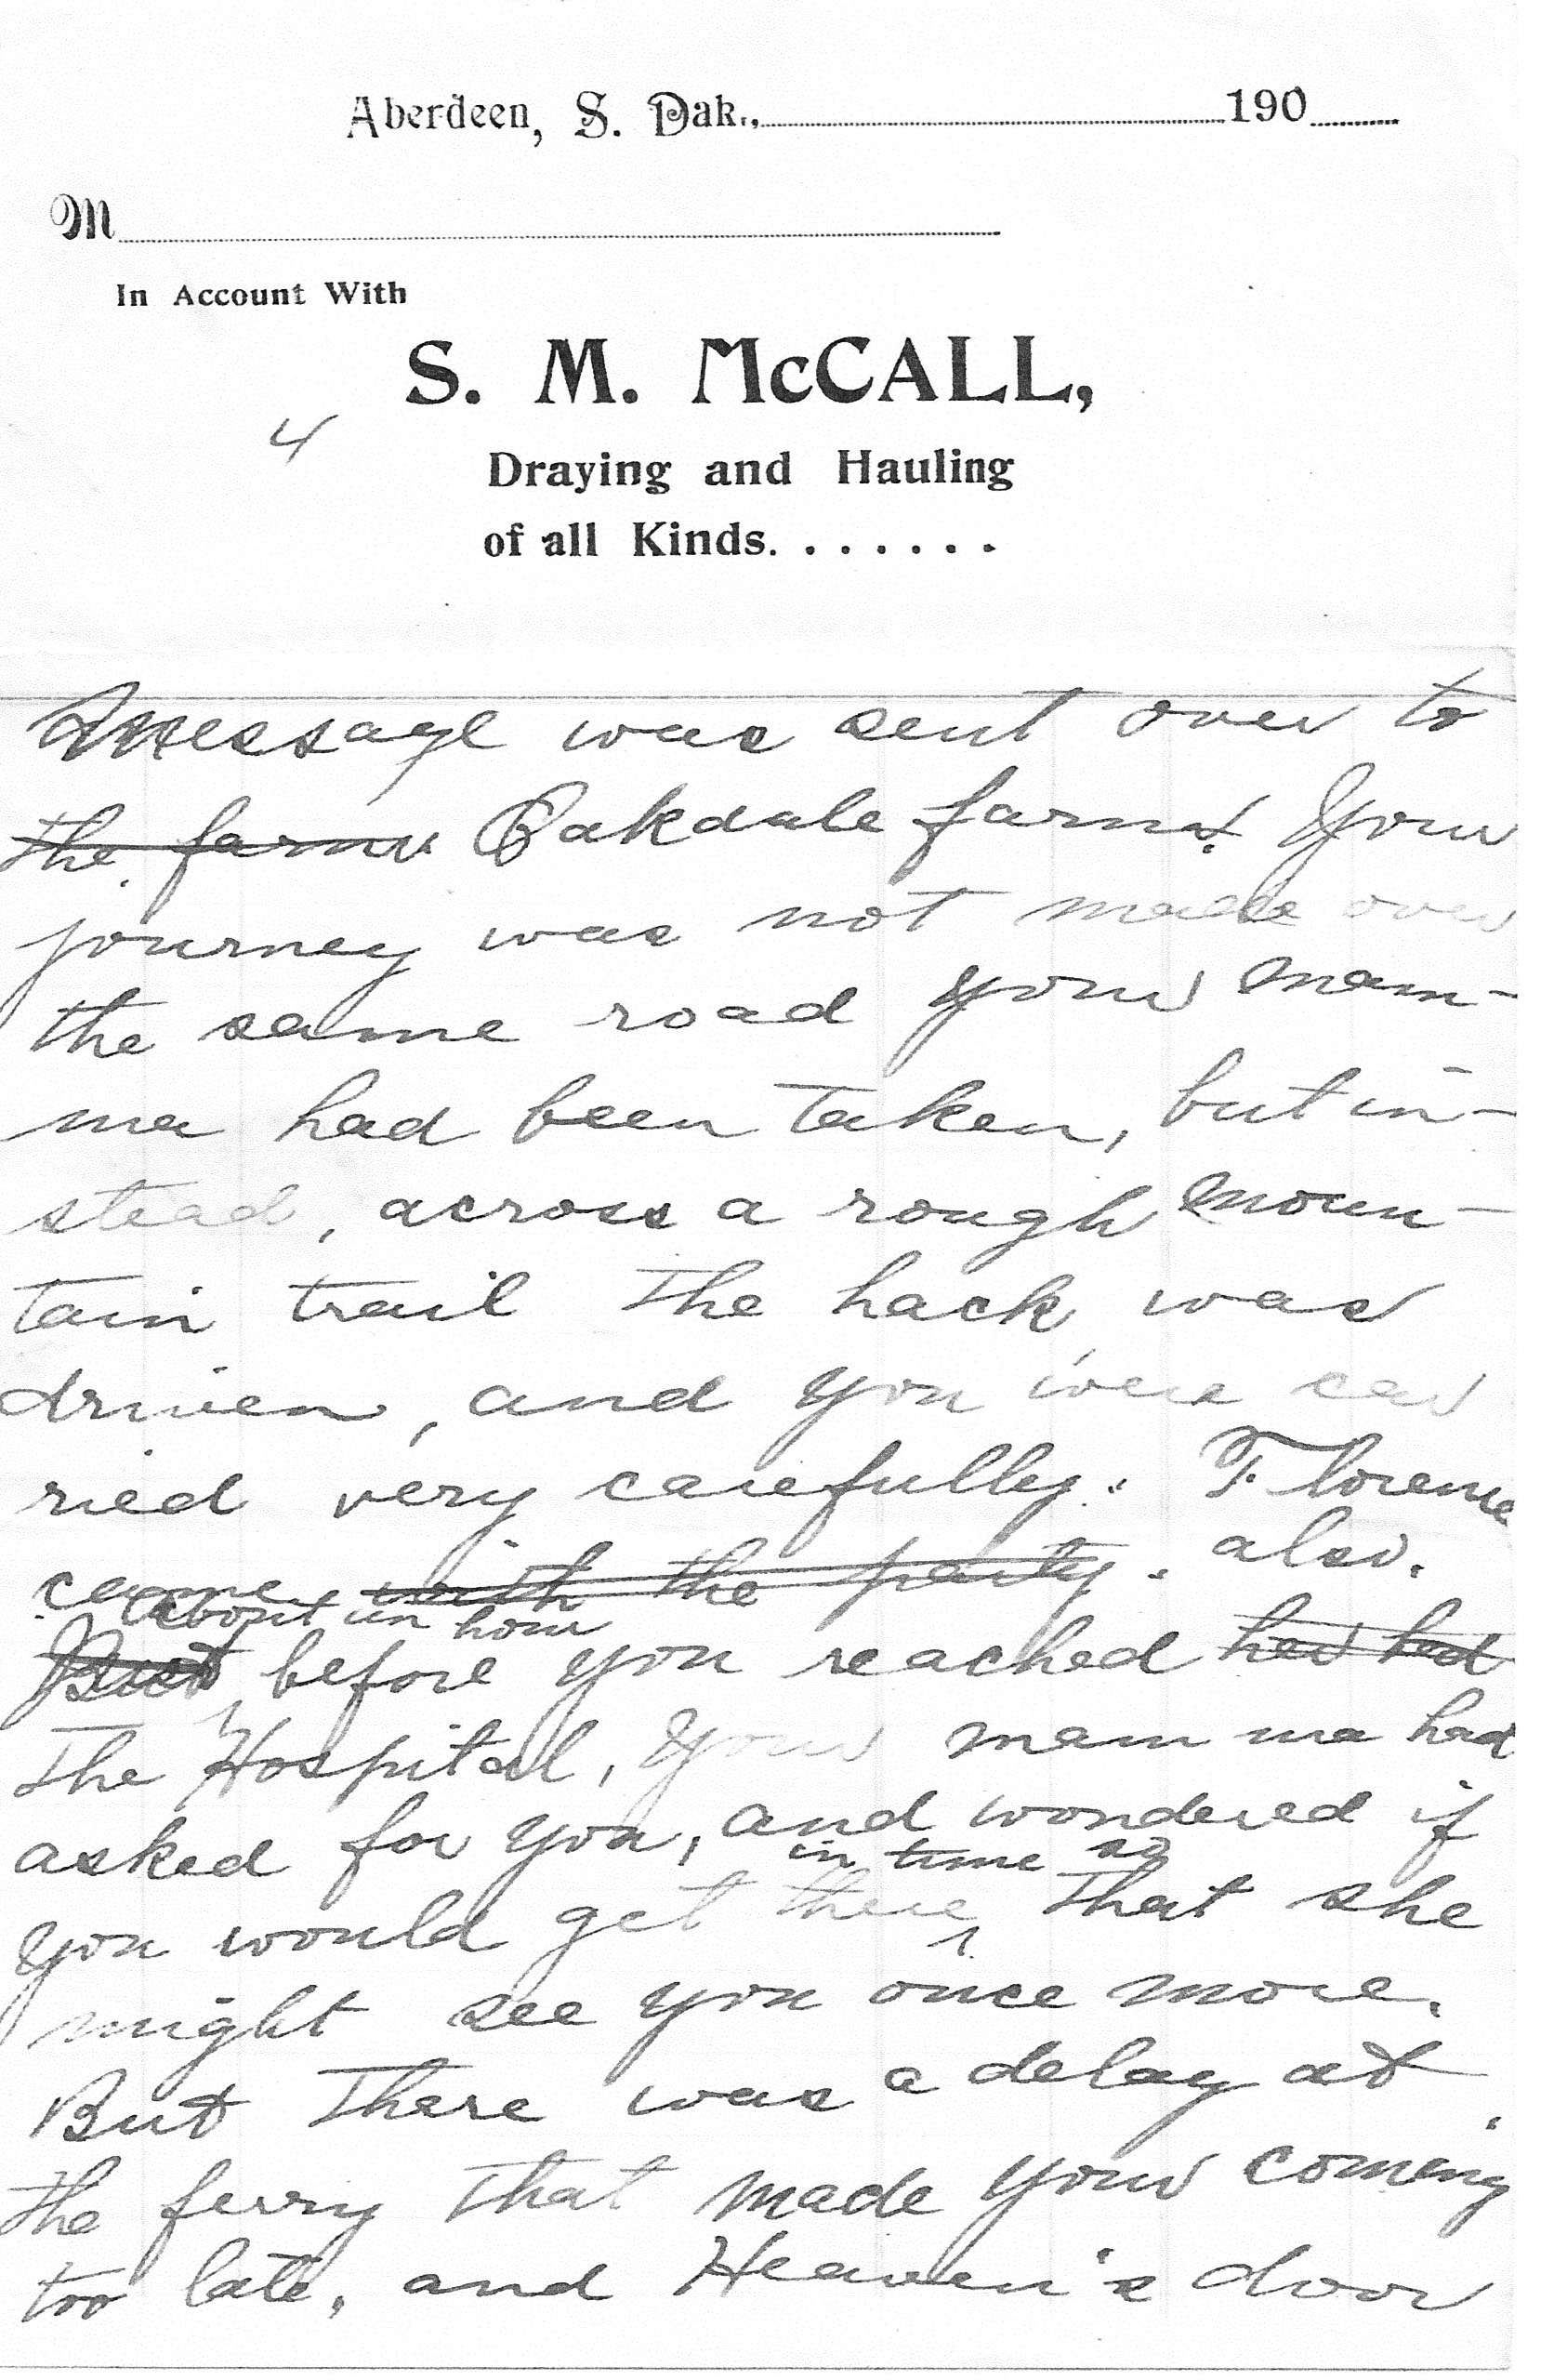 Letter to Horace page 6